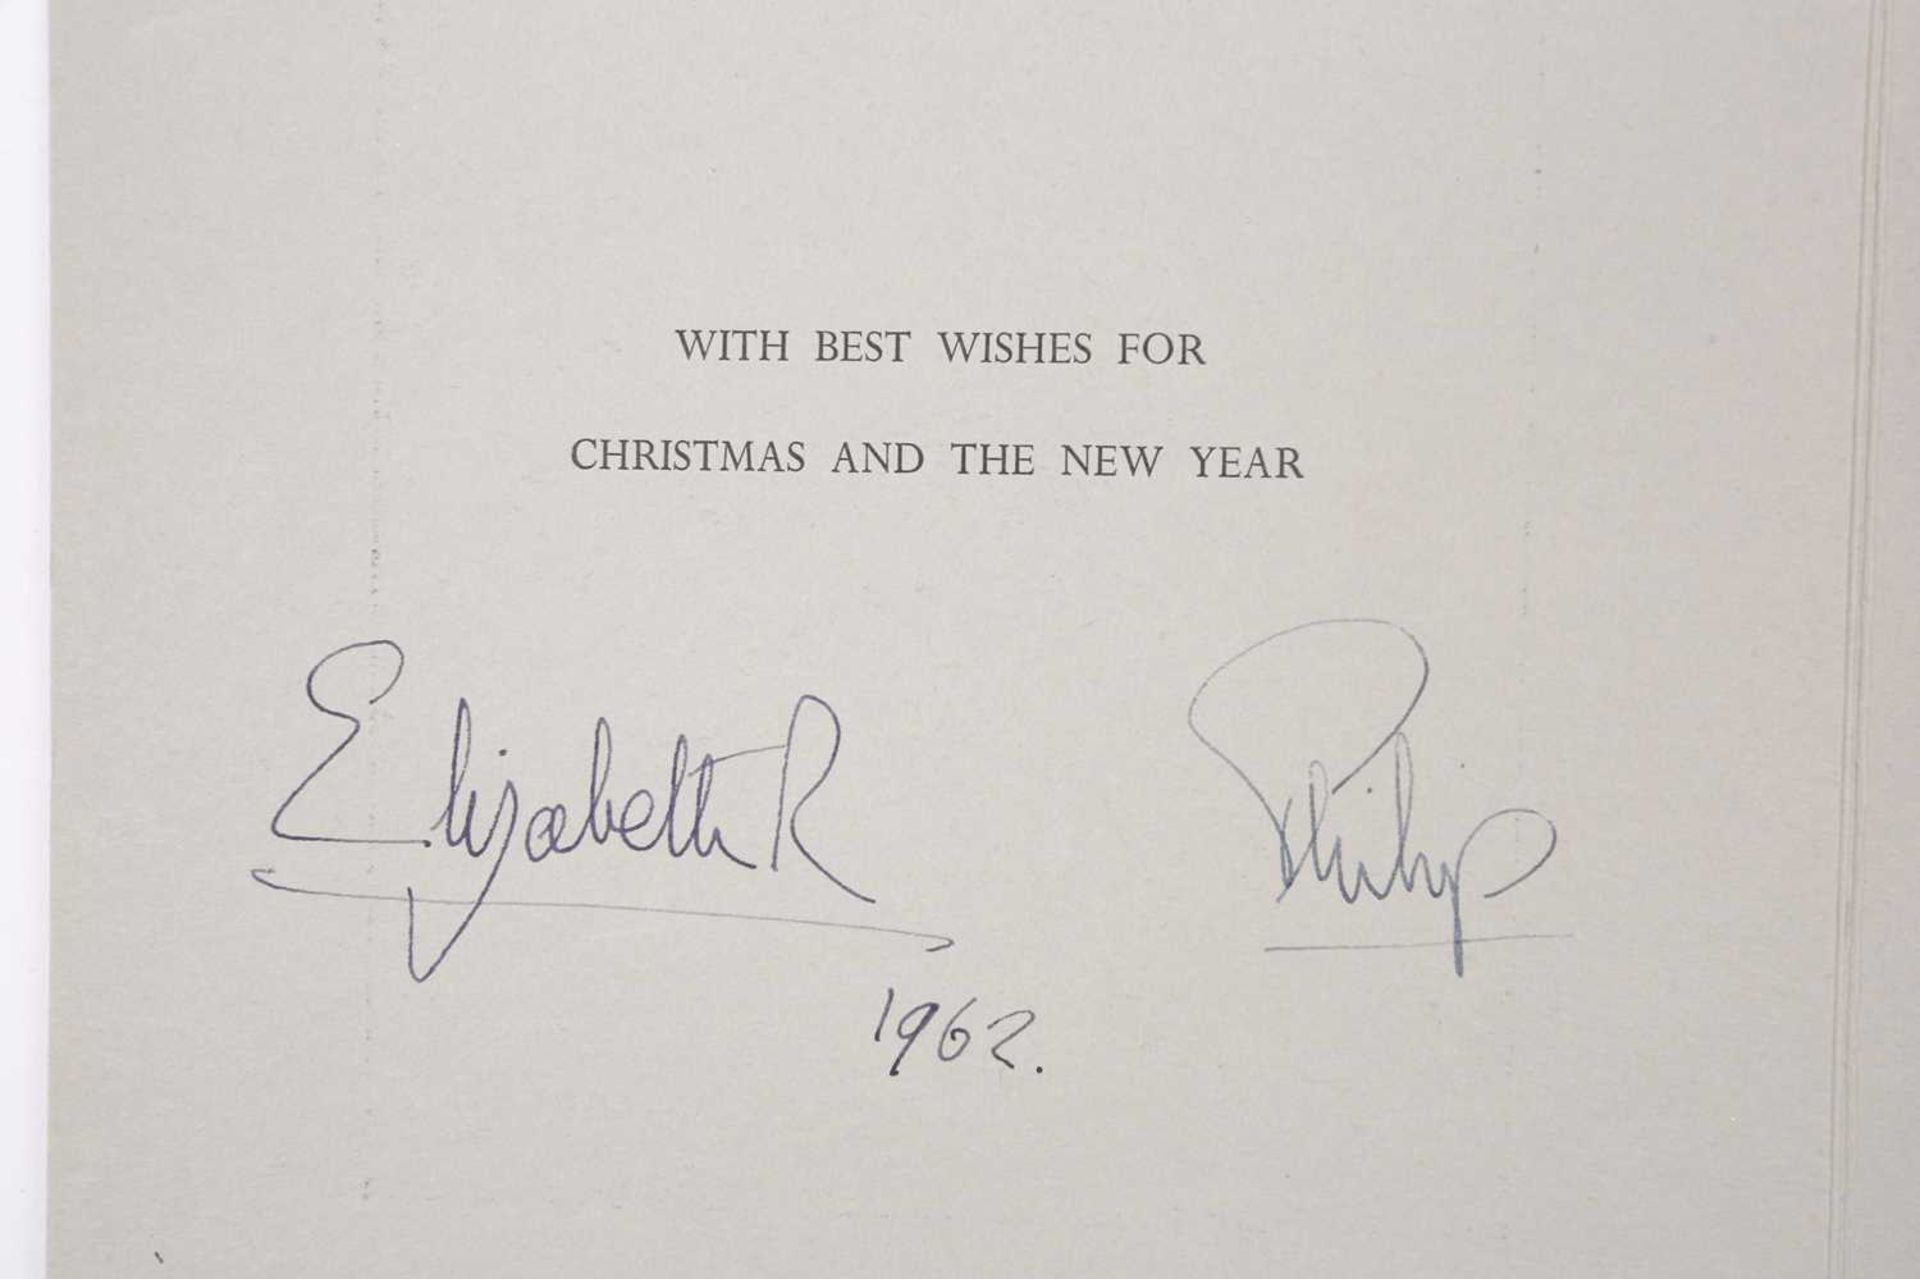 Queen Elizabeth II and Prince Philip: a 1962 Christmas card from the Royal couple, embossed - Image 10 of 10